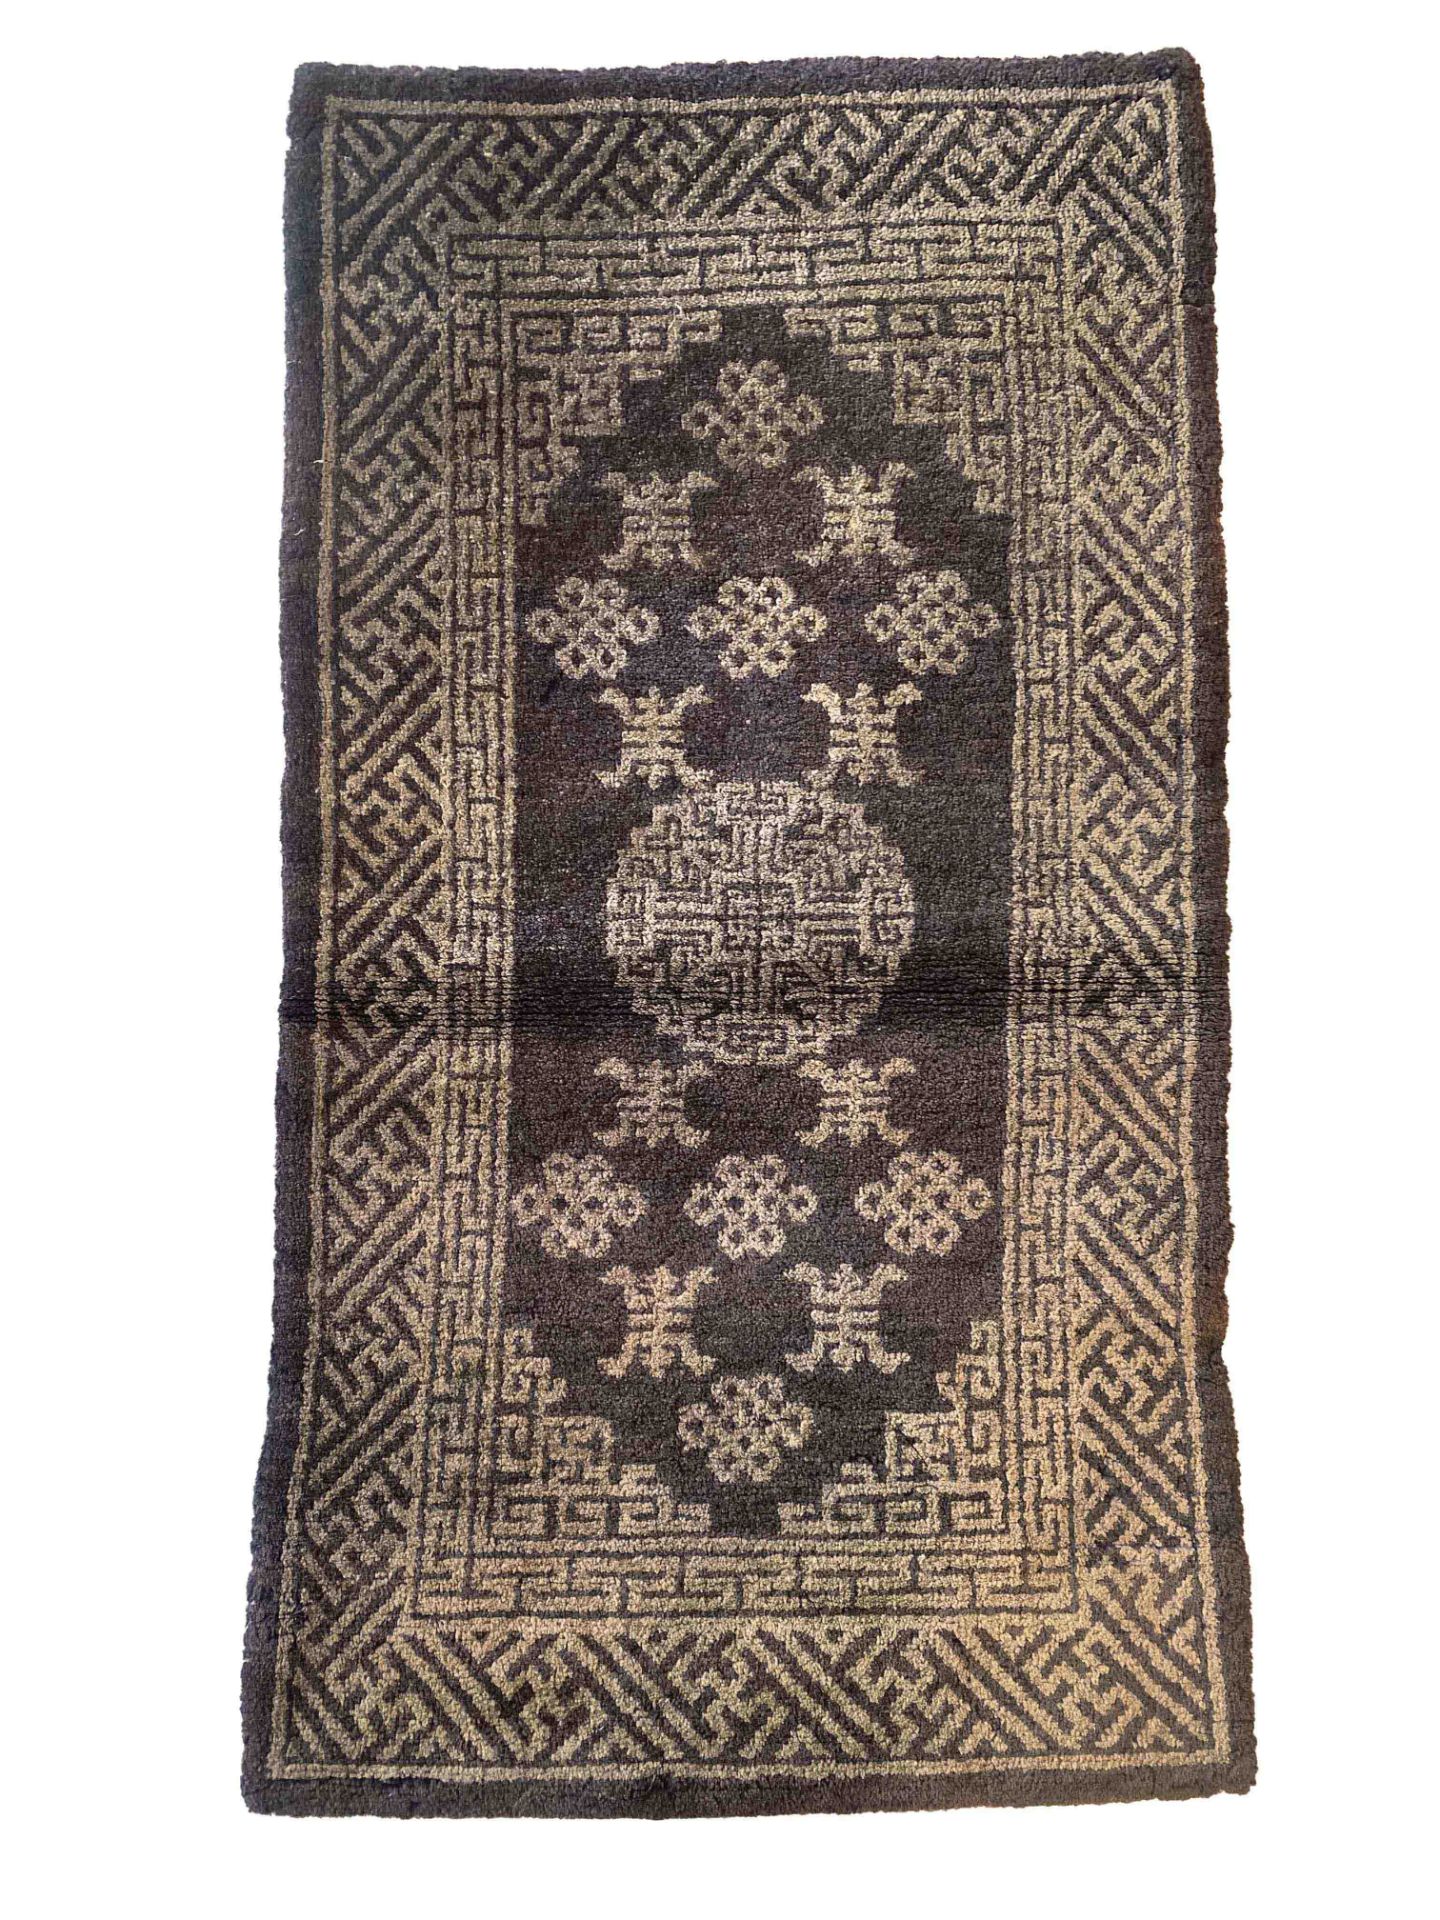 Carpet, China, minor wear, 120 x 60 cm - The carpet can only be viewed and collected at another